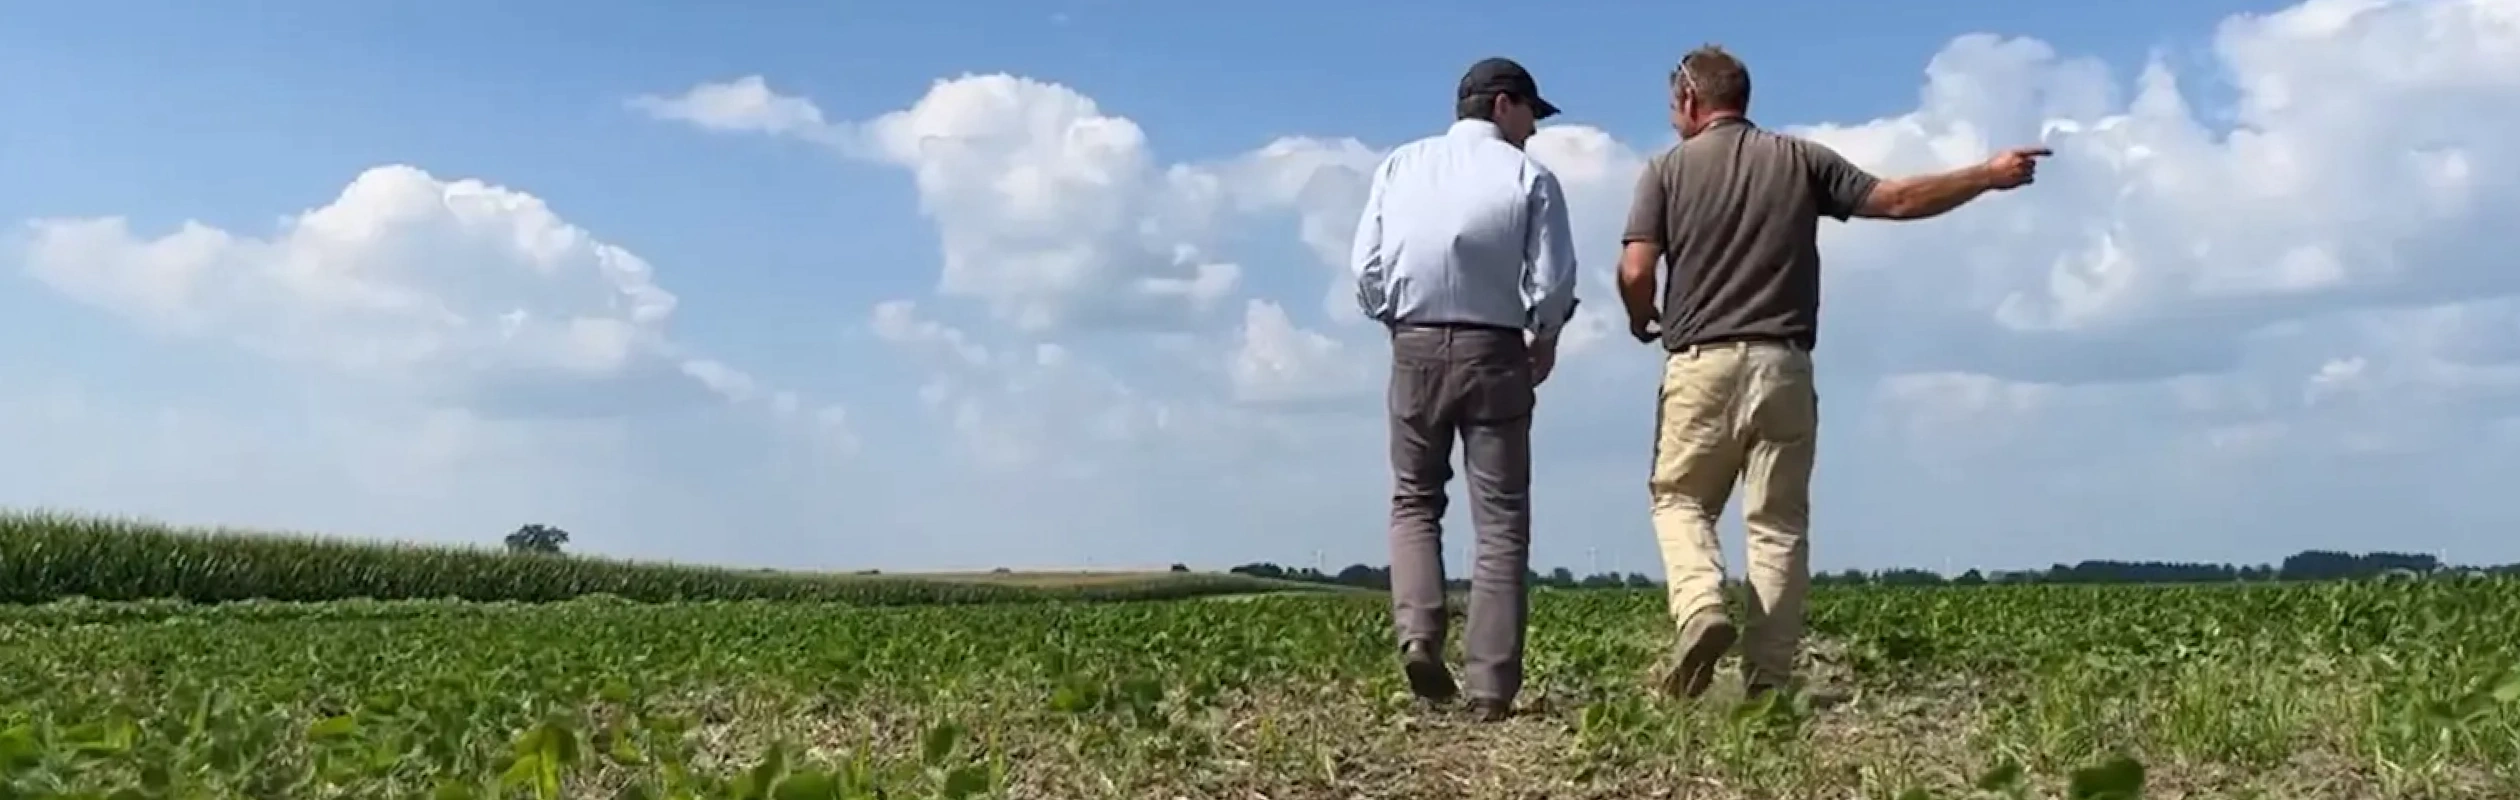 View from behind of two men talking in field.